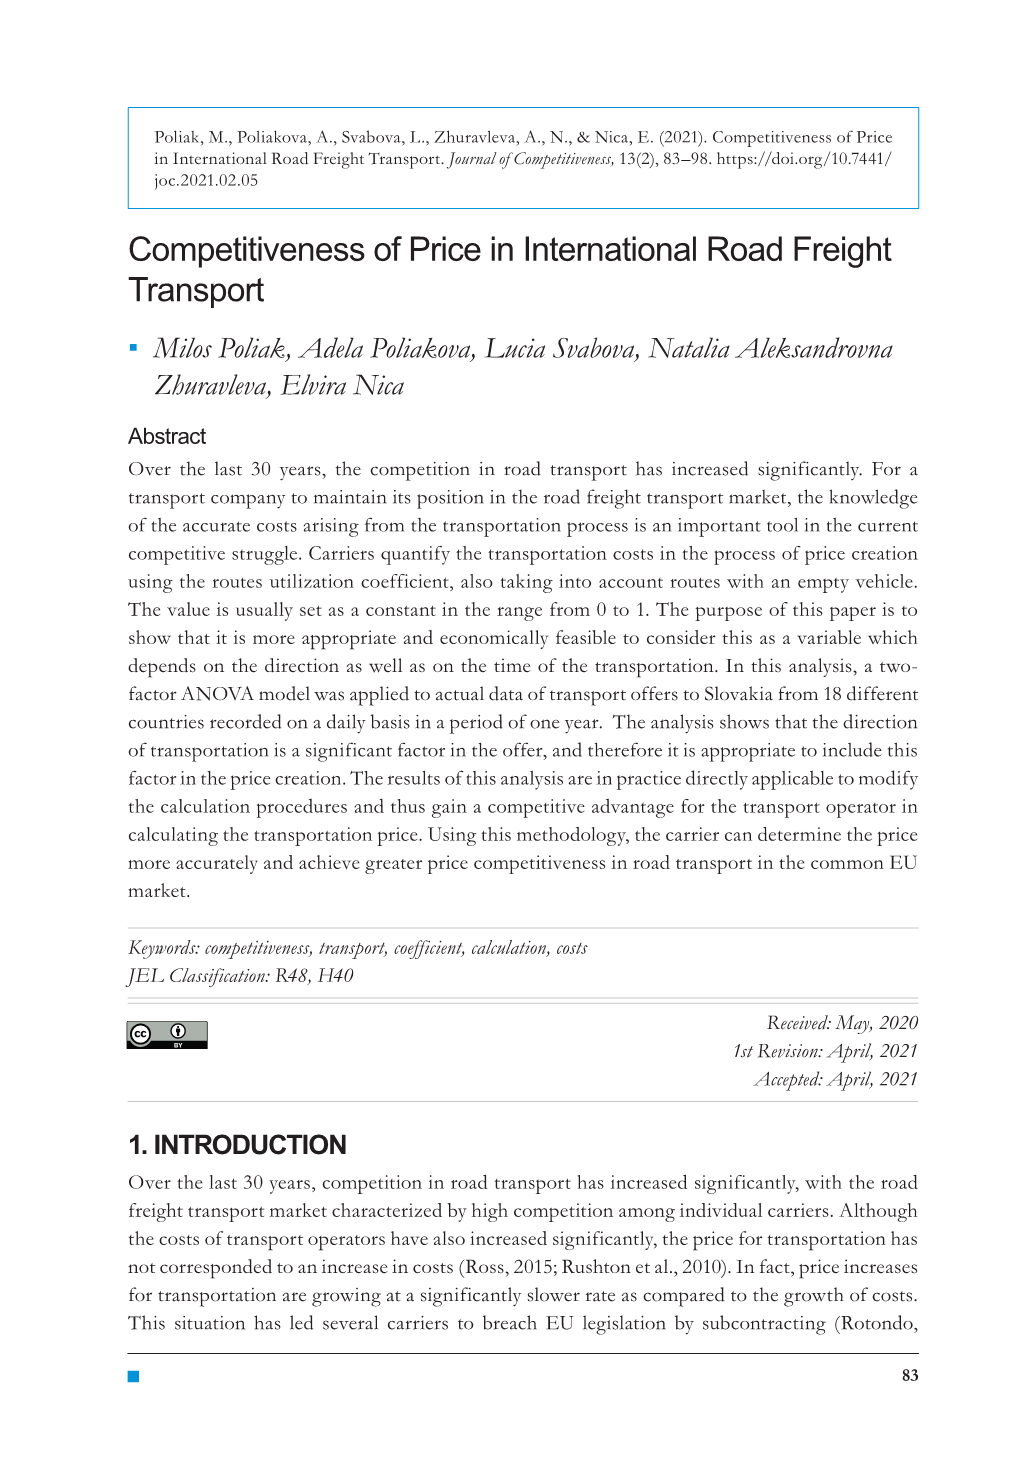 Competitiveness of Price in International Road Freight Transport